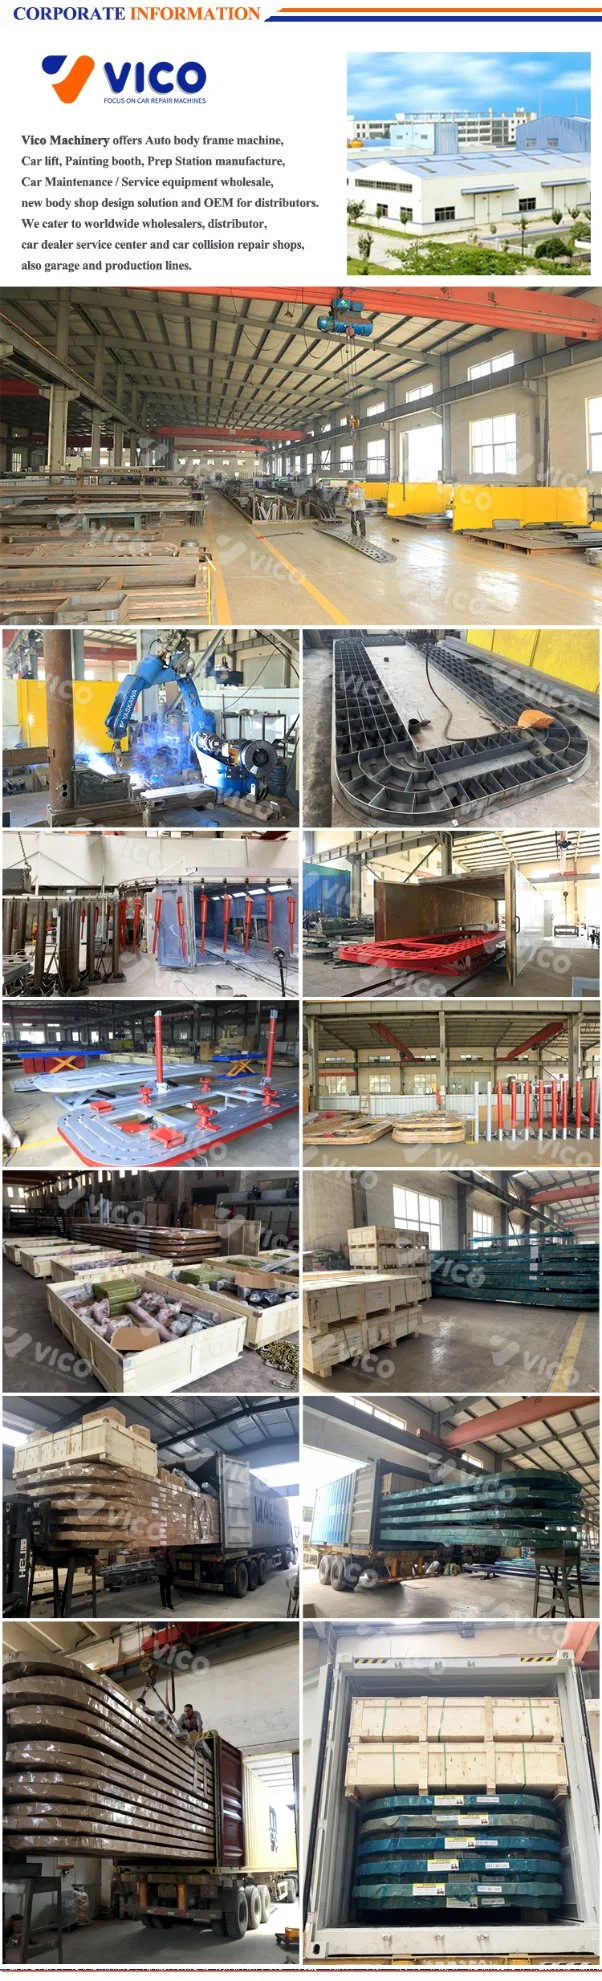 CE Factory Car Straightening Frame Machine Vehicle Body Repair Equipment for Auto Body Collision #Vf5000